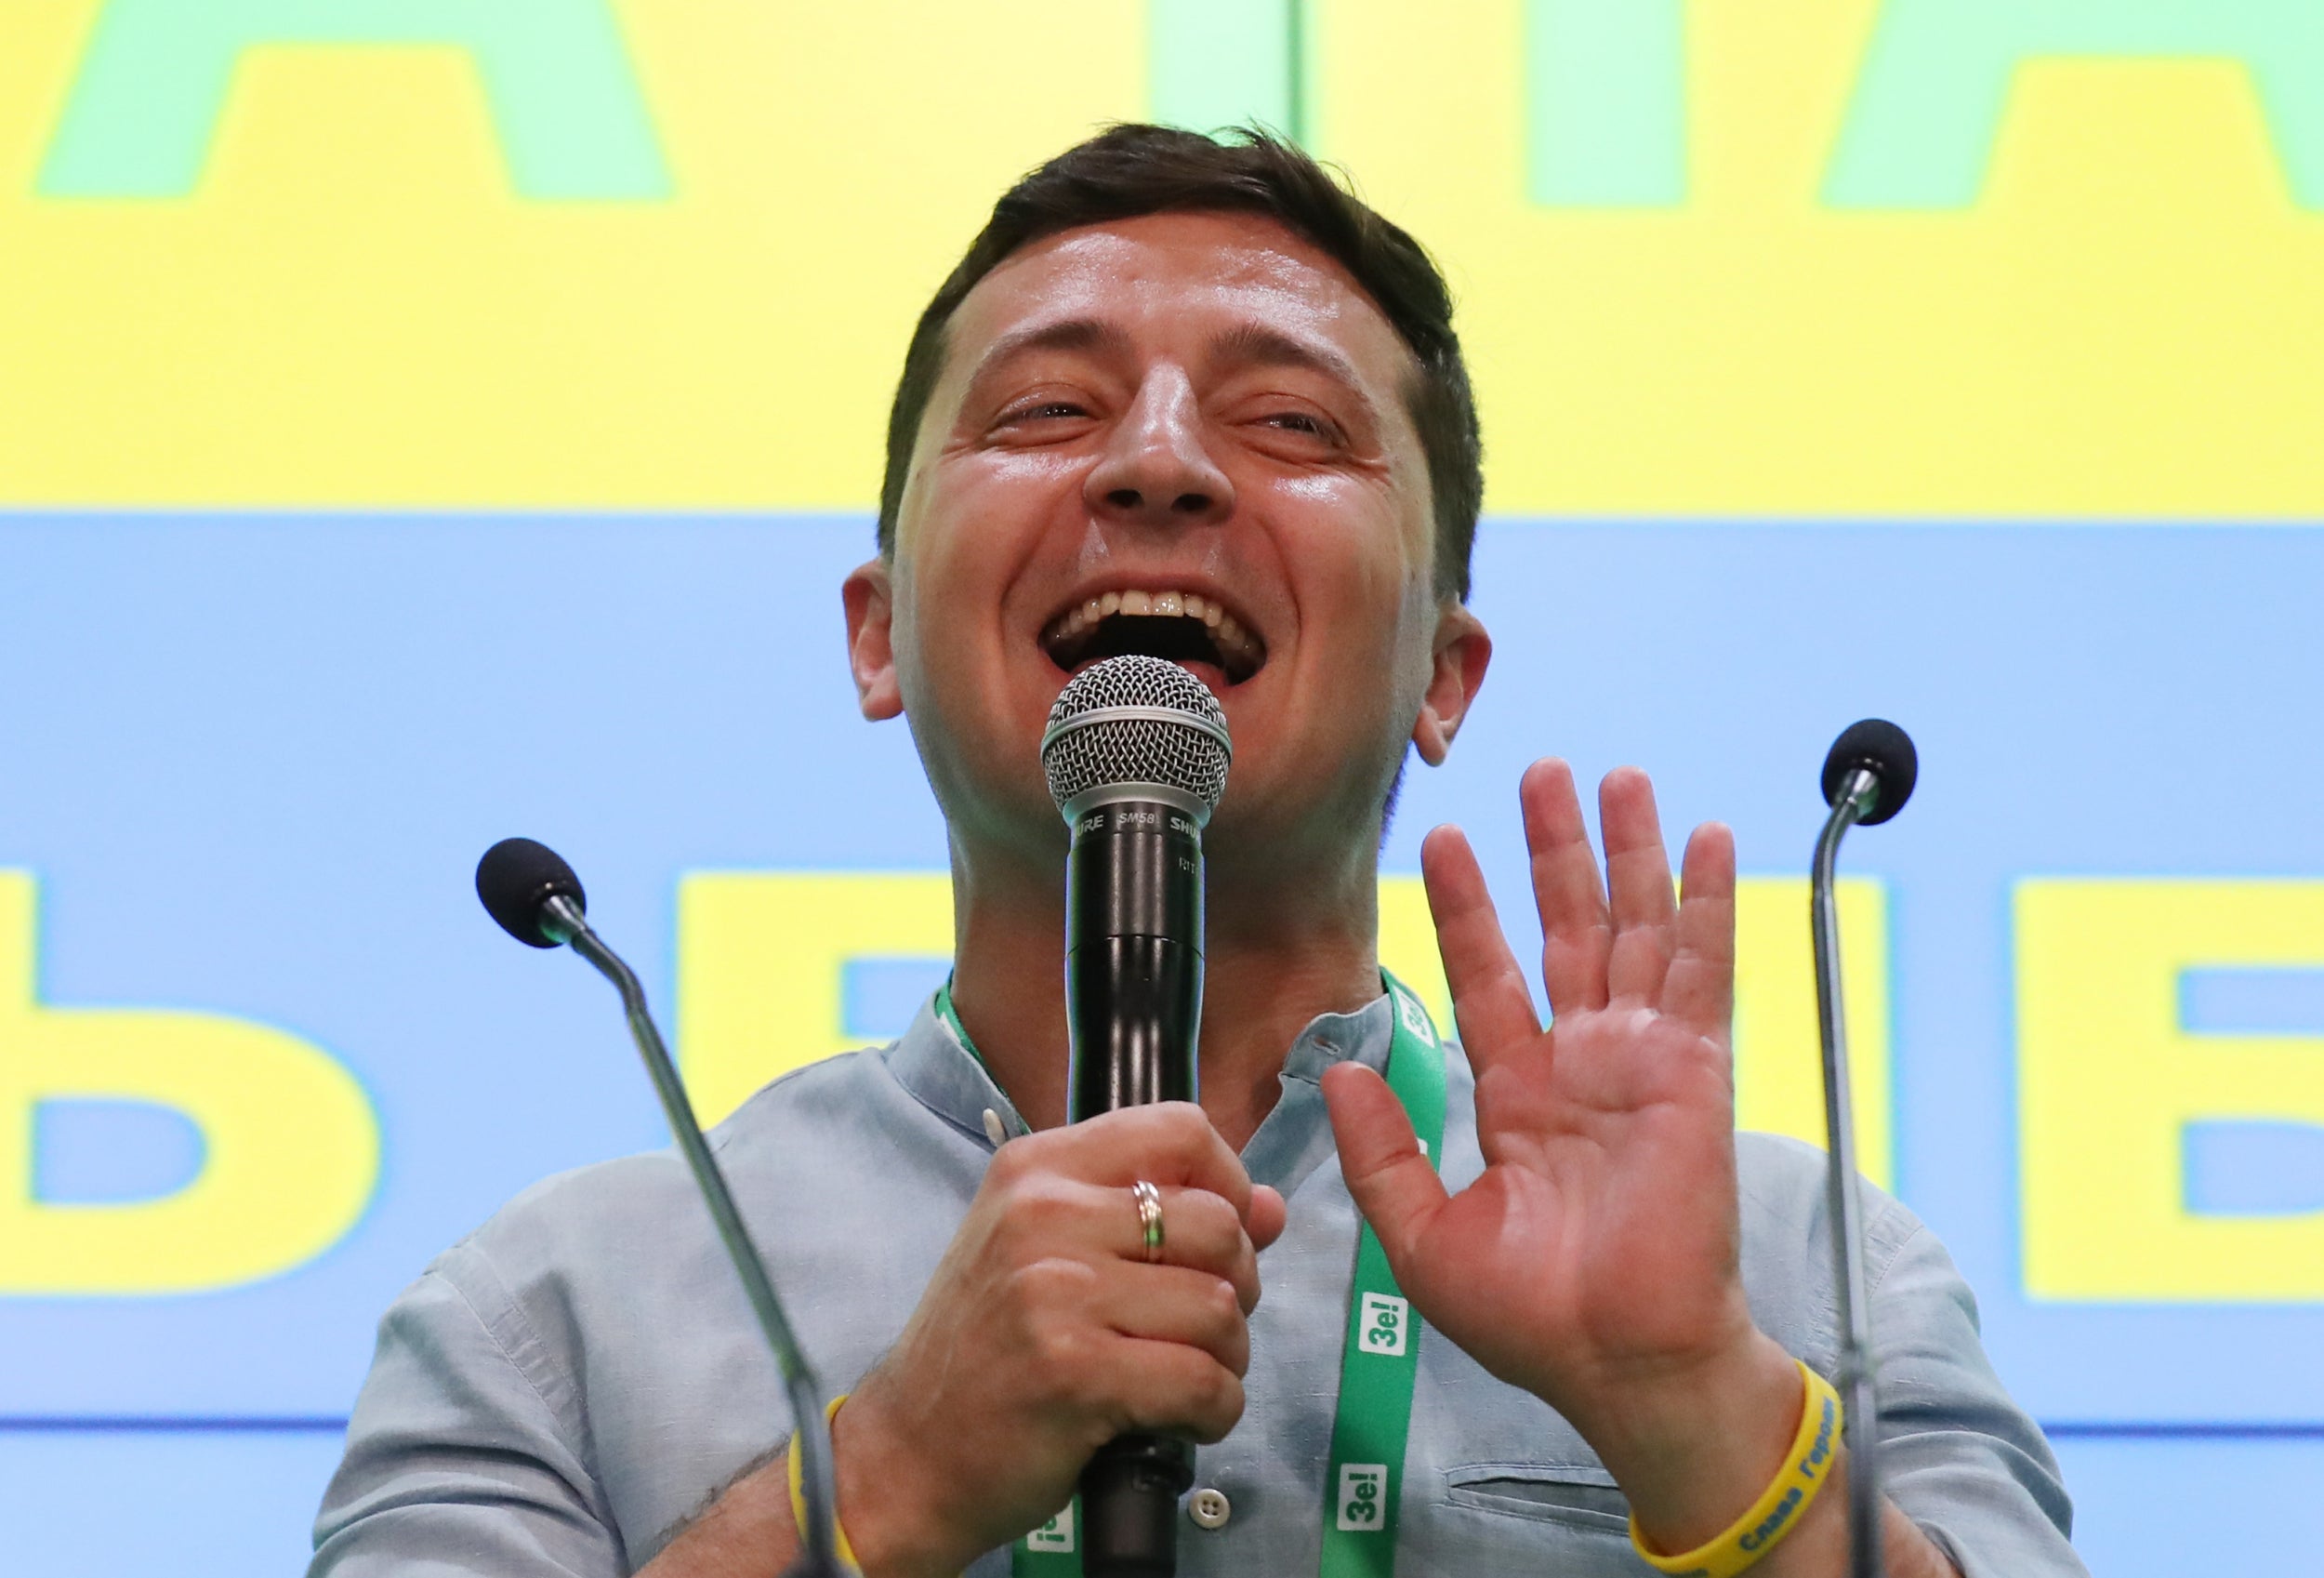 Since his election, Zelensky has displayed a canny popular touch, with all the timing and carriage of a showbiz professional